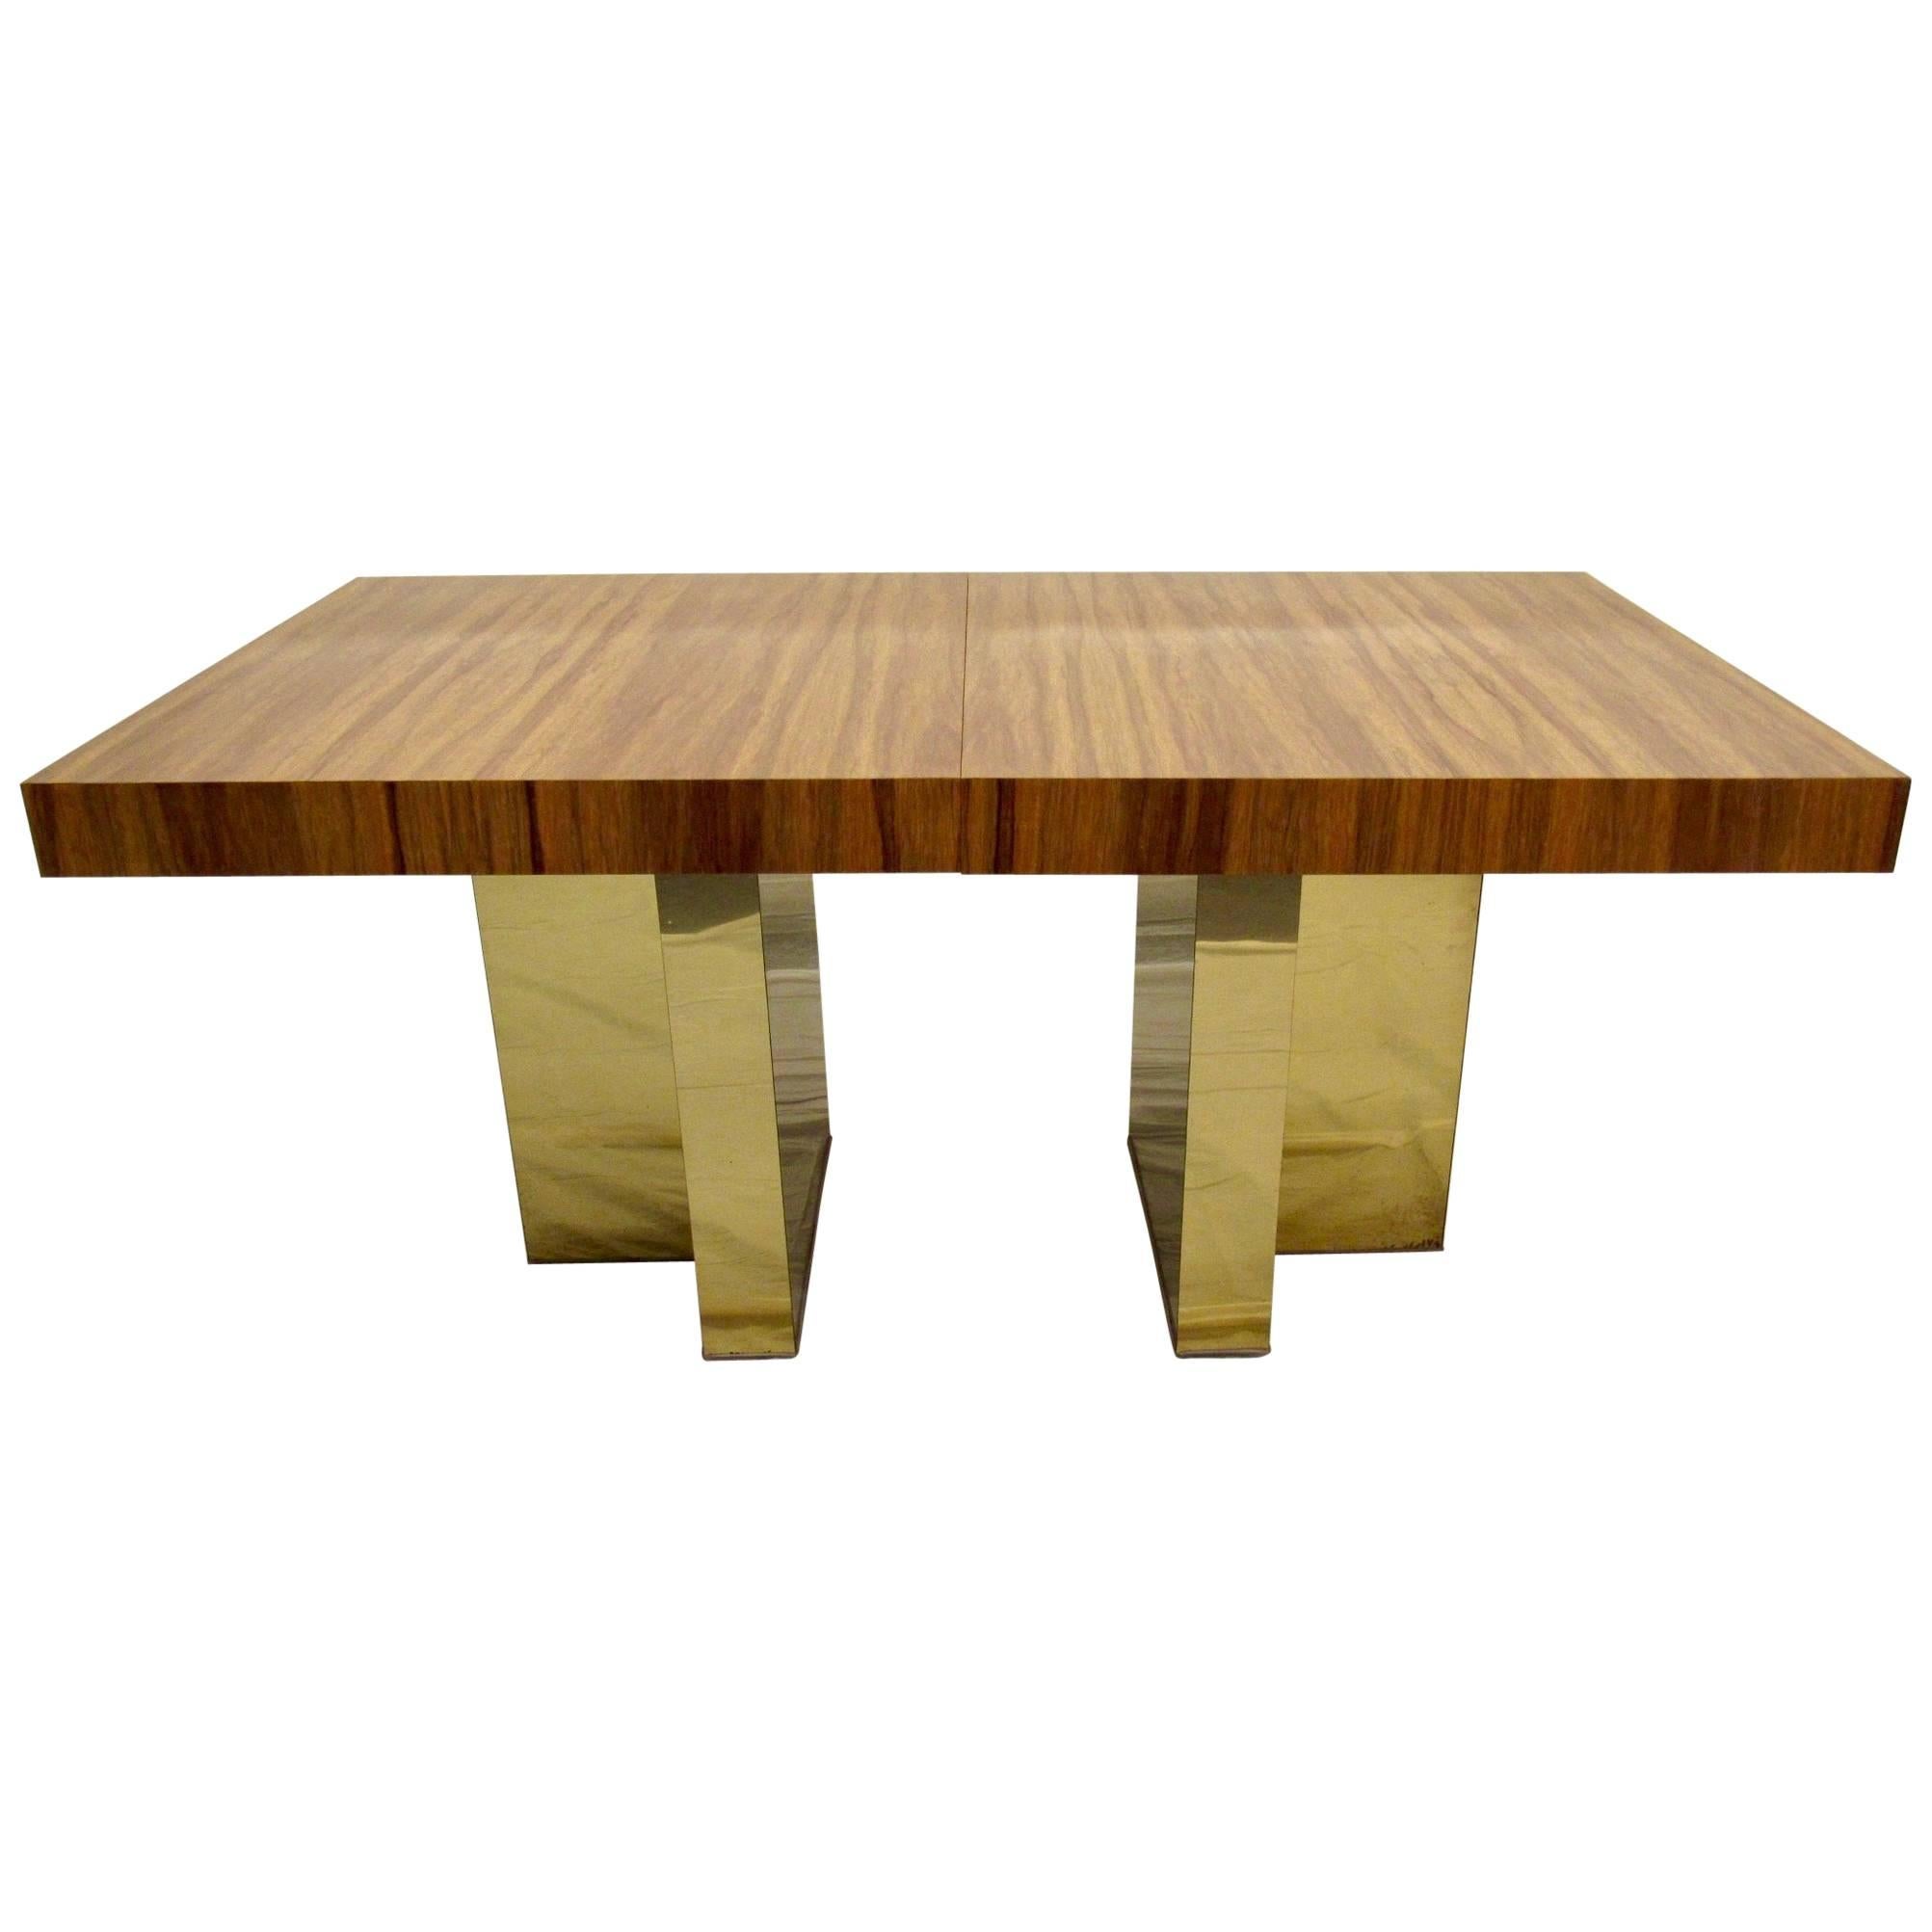 Milo Baughman Brass and Exotic Brazilian Rosewood Dining Table for Thayer Coggin